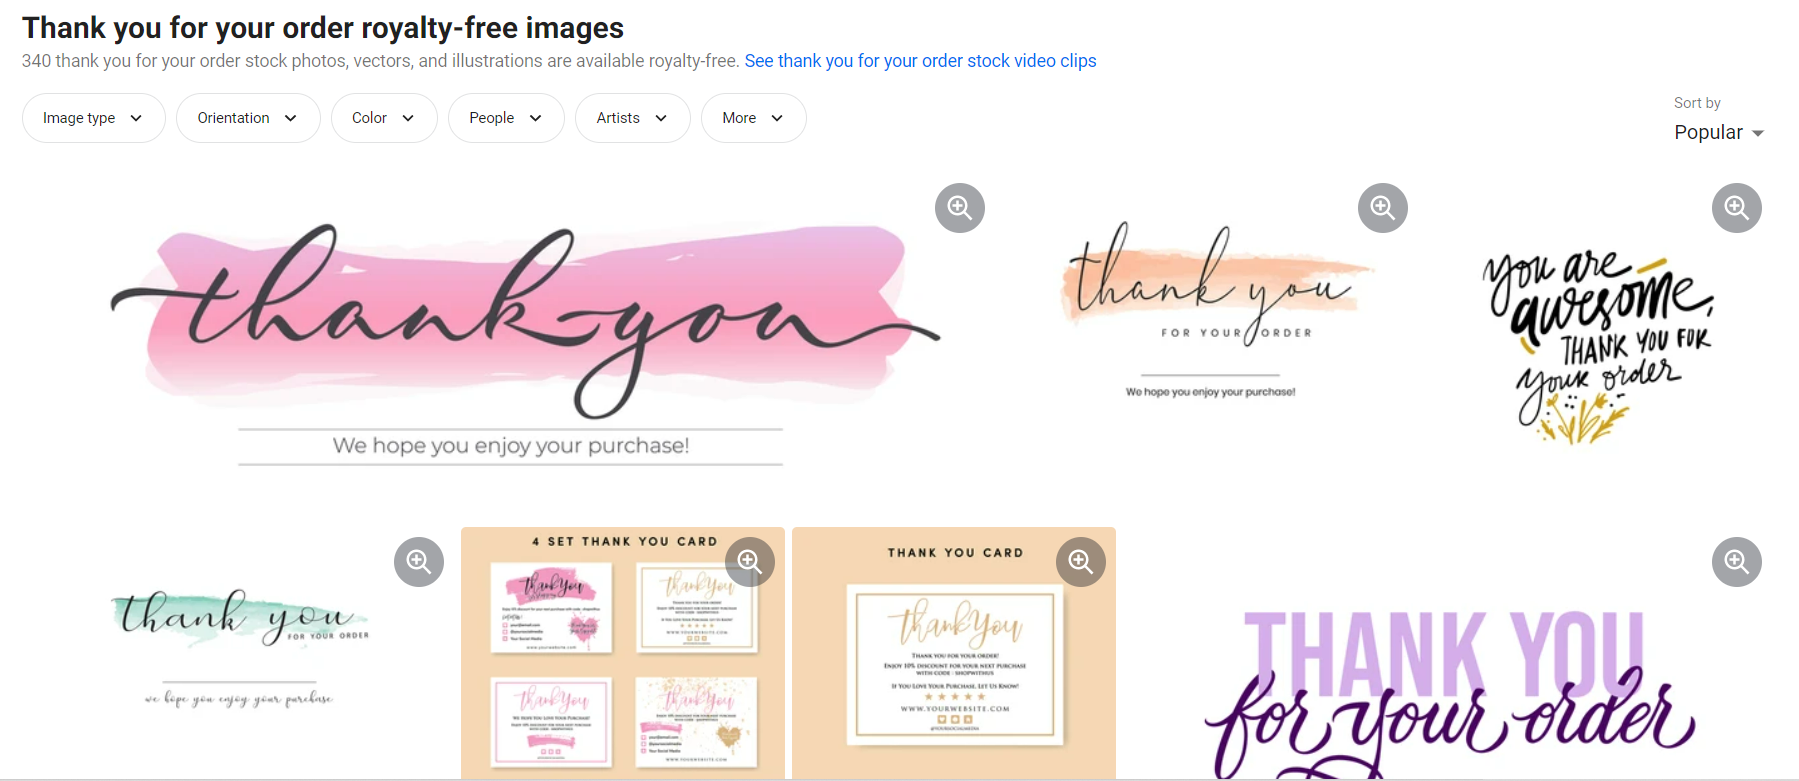 ‘Thank you for your order’ images